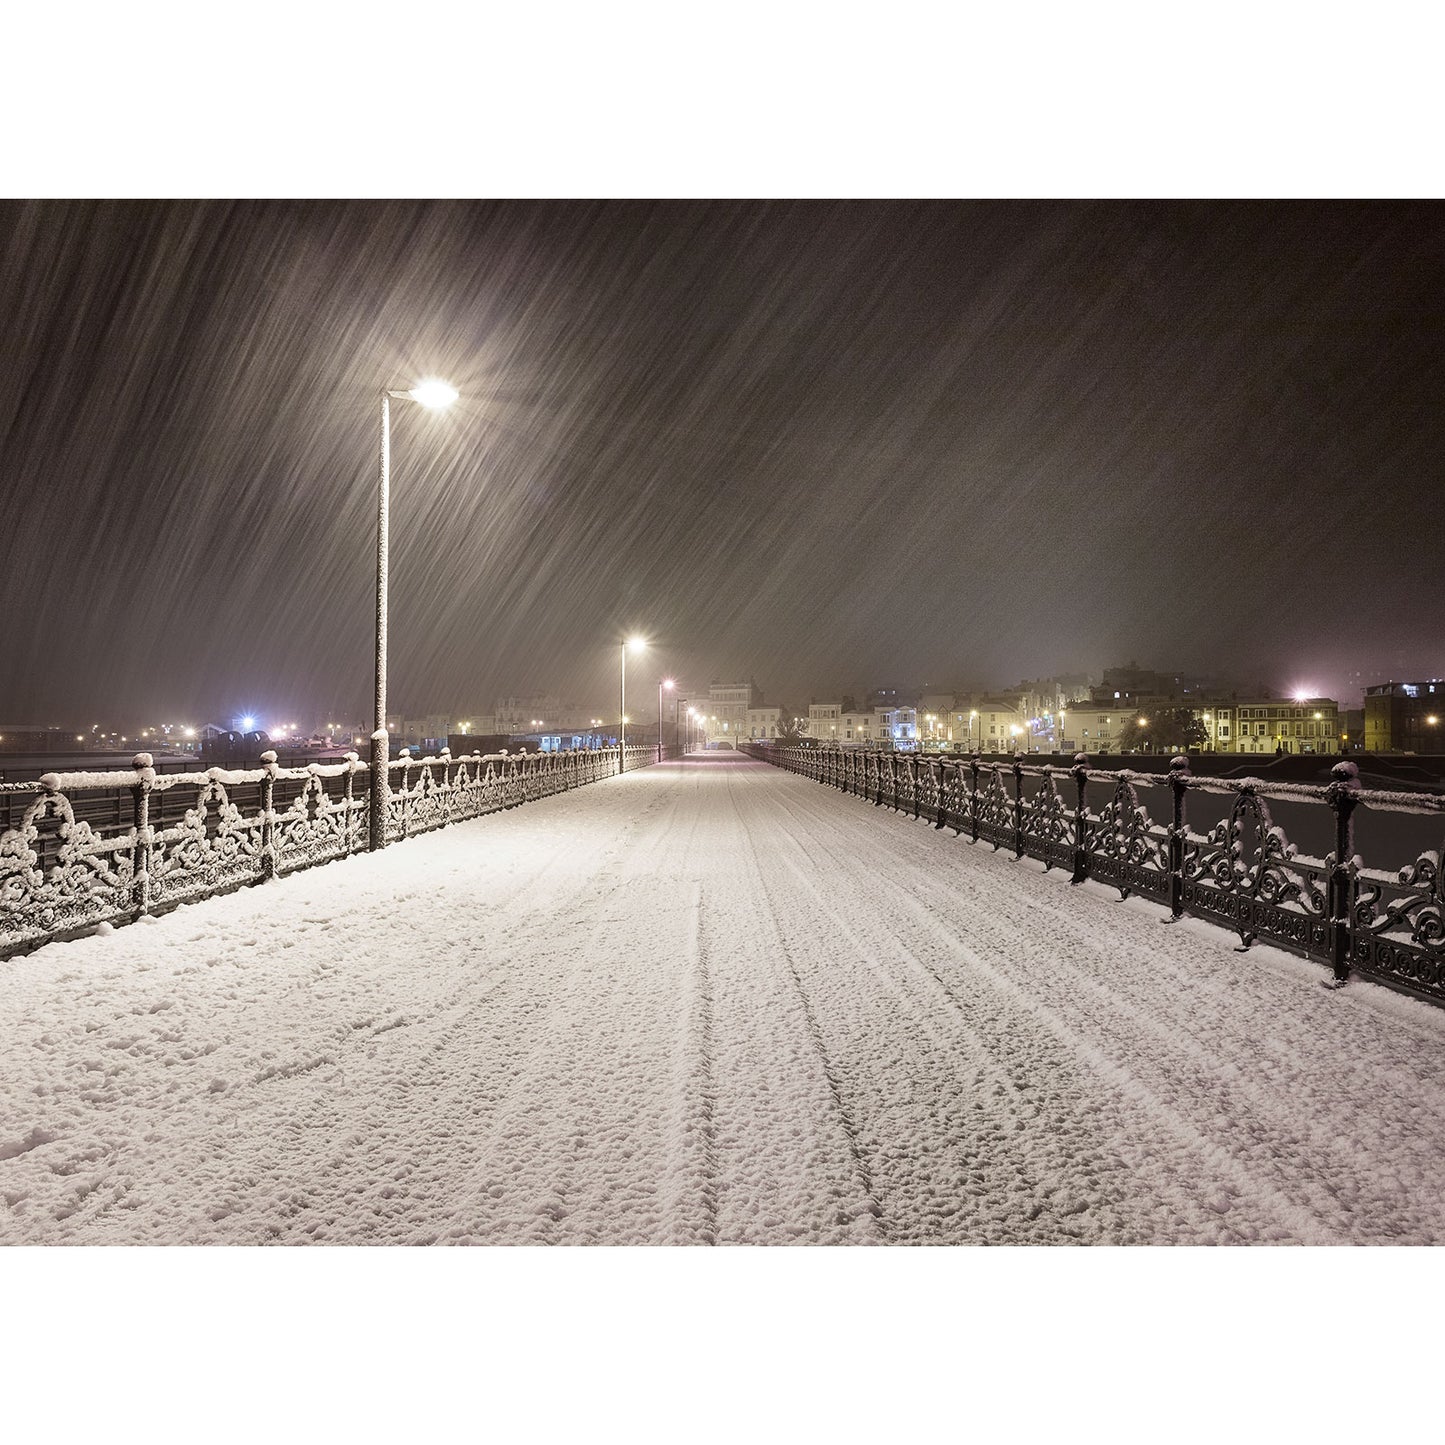 Ryde Pier in the snow